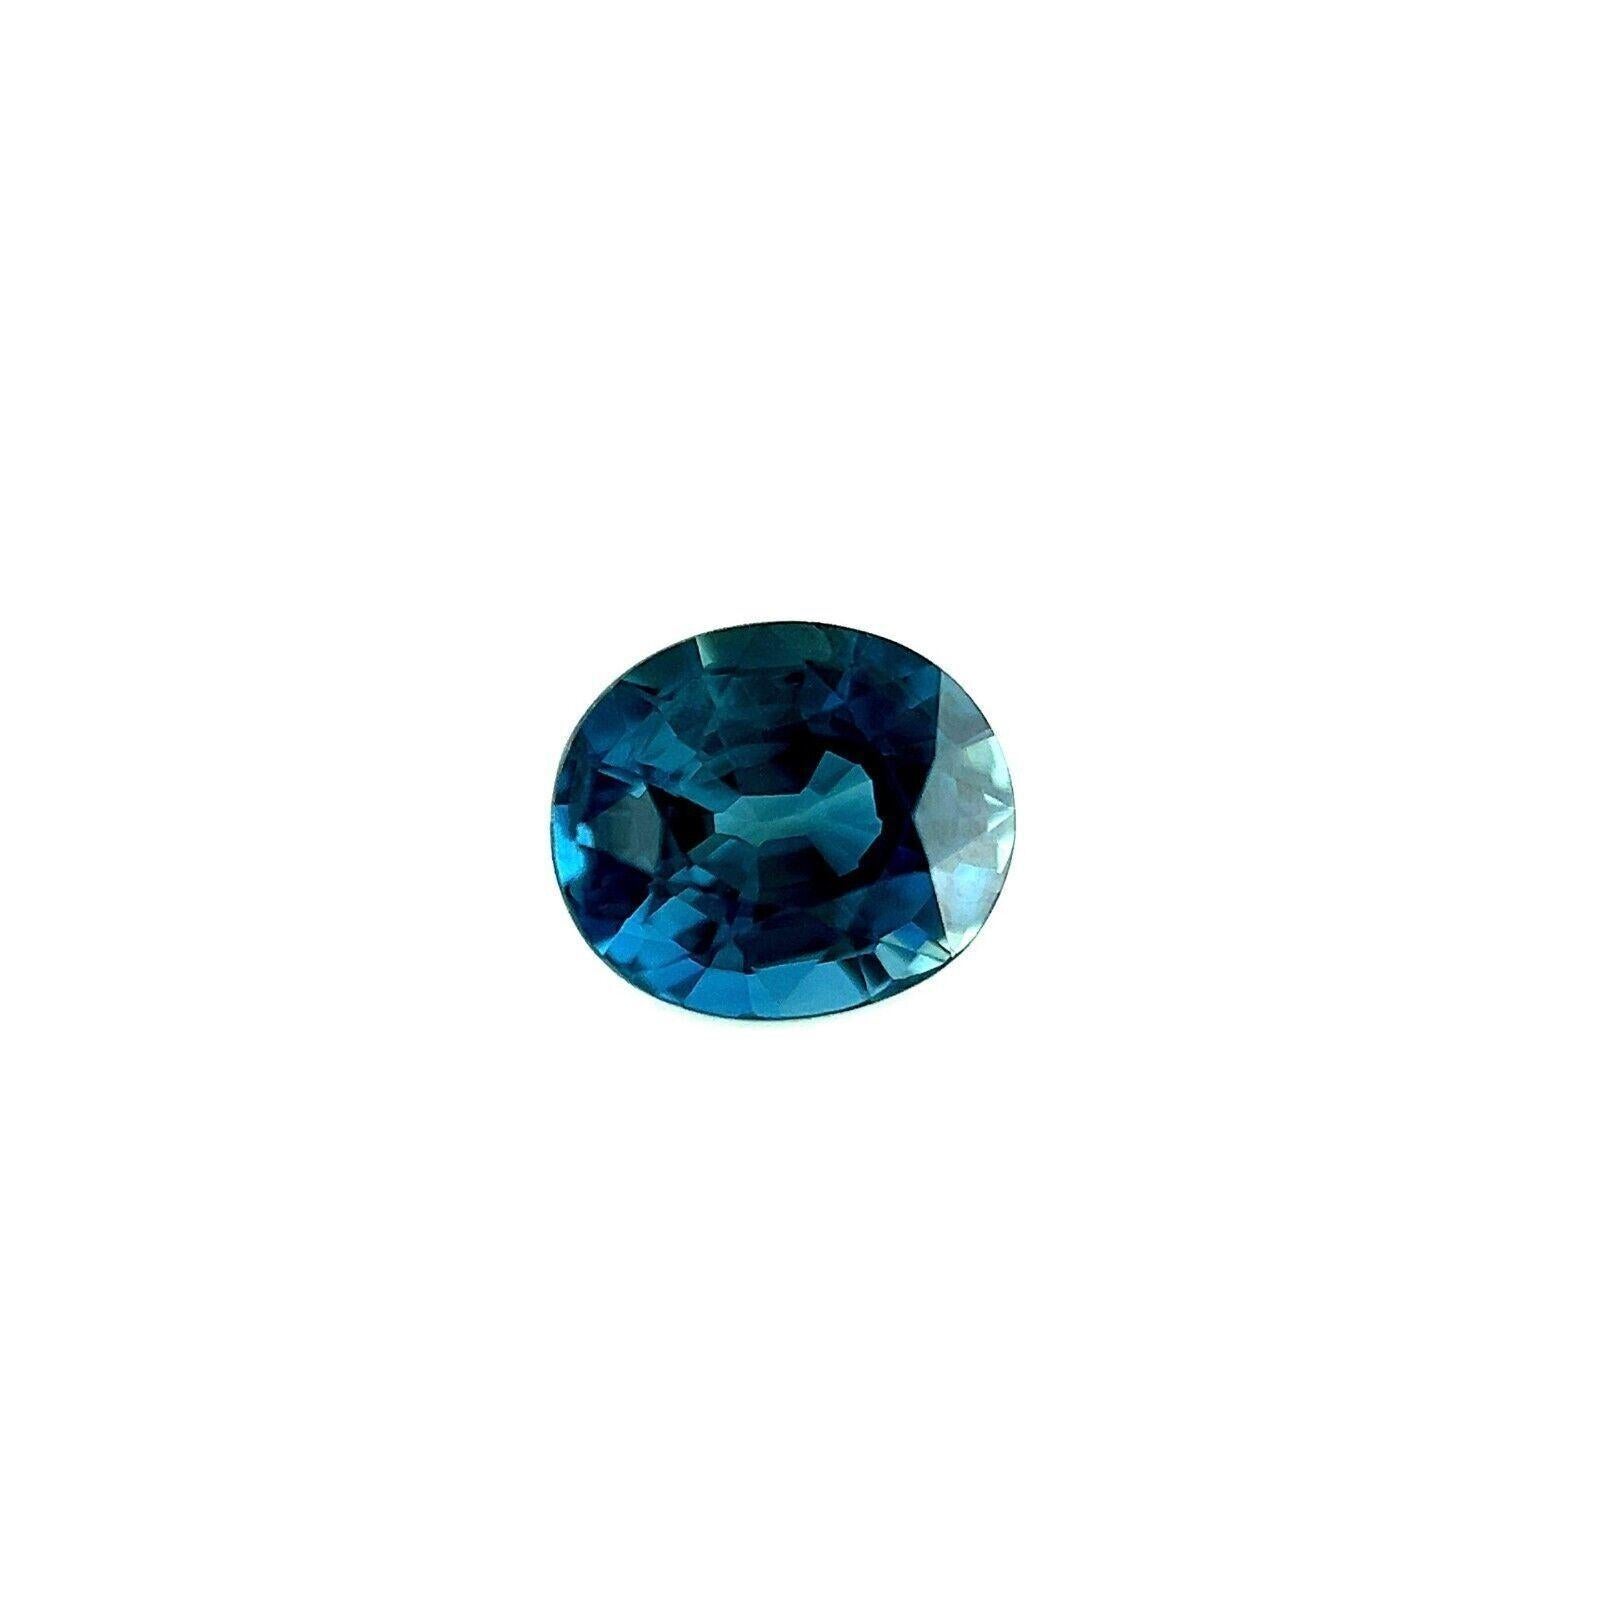 Top Grade 0.71ct Natural Blue Australian Sapphire Oval Rare Gem 5.5x4.8mm VVS

Top Grade Natural Australian Blue Sapphire Gemstone.
0.71 Carat with a beautiful fine blue colour and excellent clarity, a very clean stone. Also has an excellent cut and